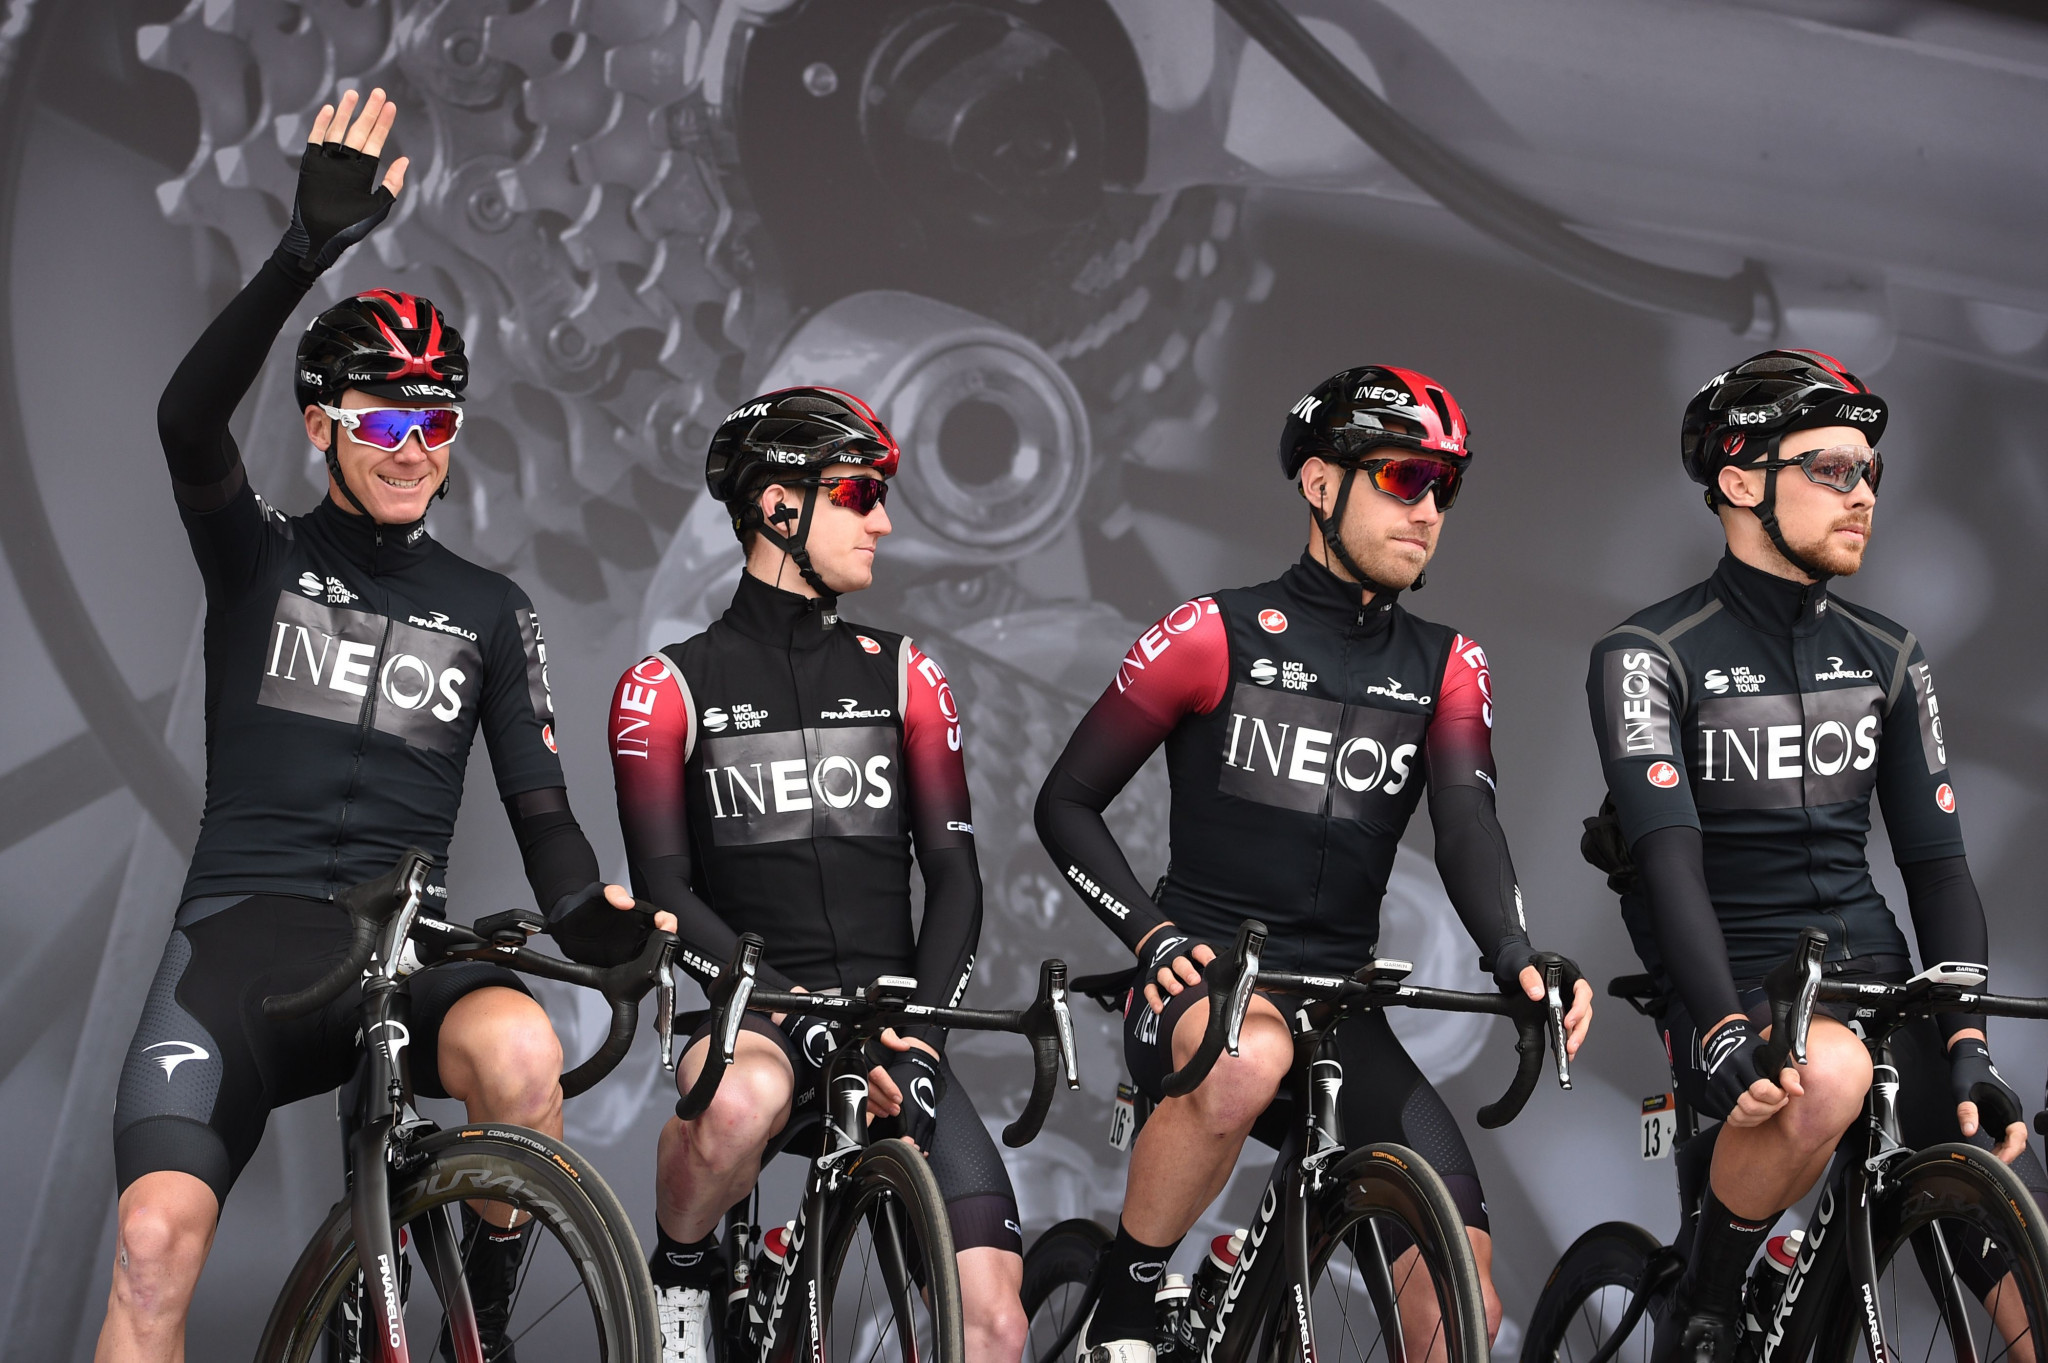 Team Ineos was officially launched at the Tour de Yorkshire this week ©Getty Images